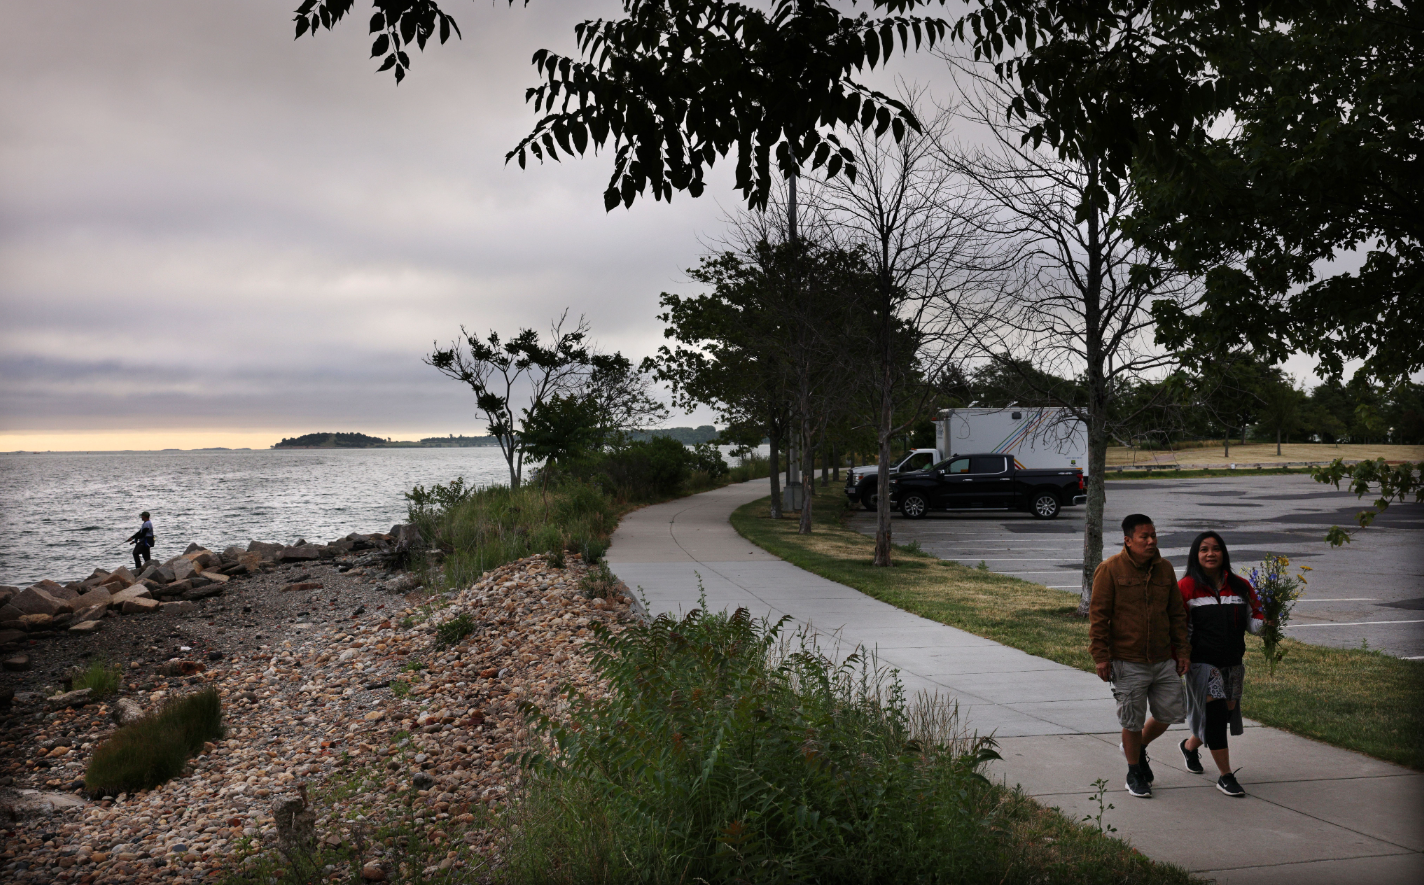 A couple walks along a paved path overlooking the Boston Harbor.